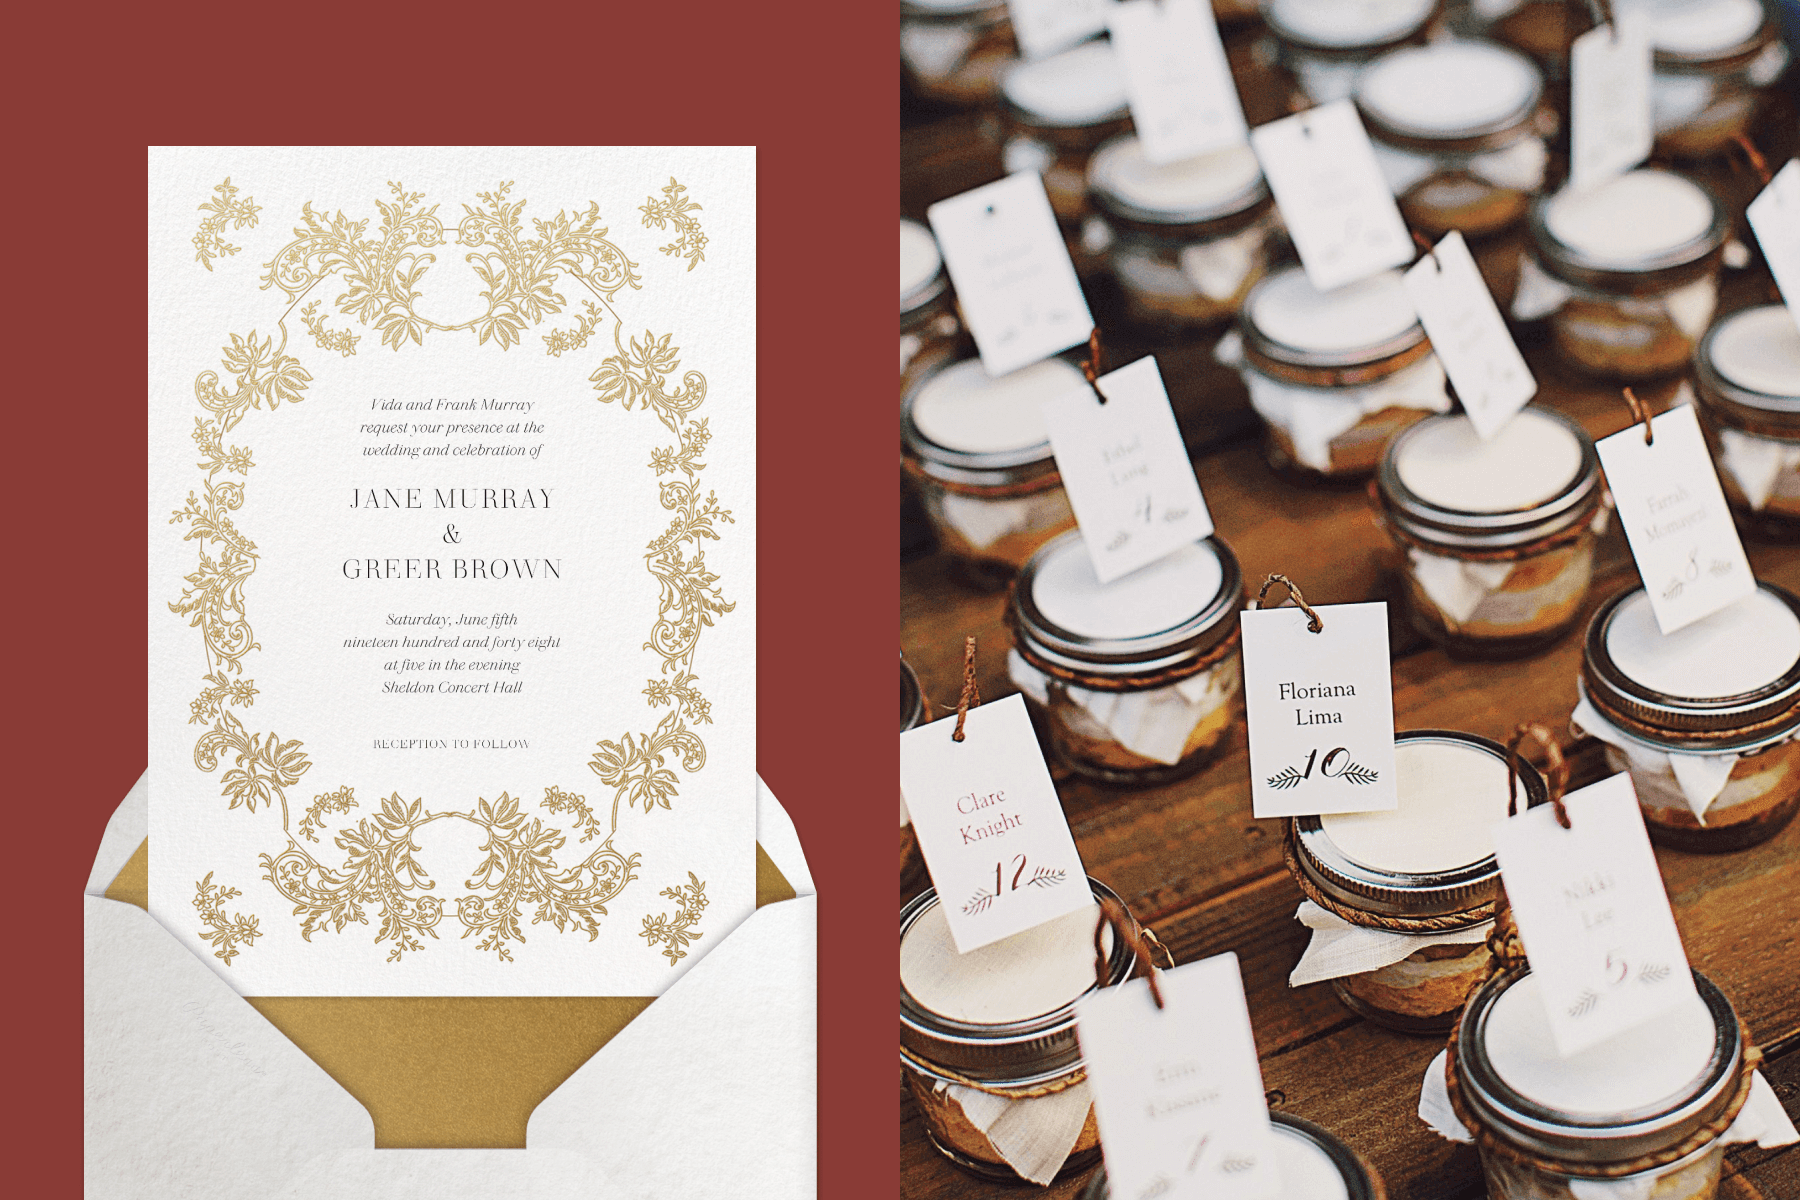 Left: A wedding invitation with gold filigree flowers; Right: A table of place cards attached to mason jar candles.